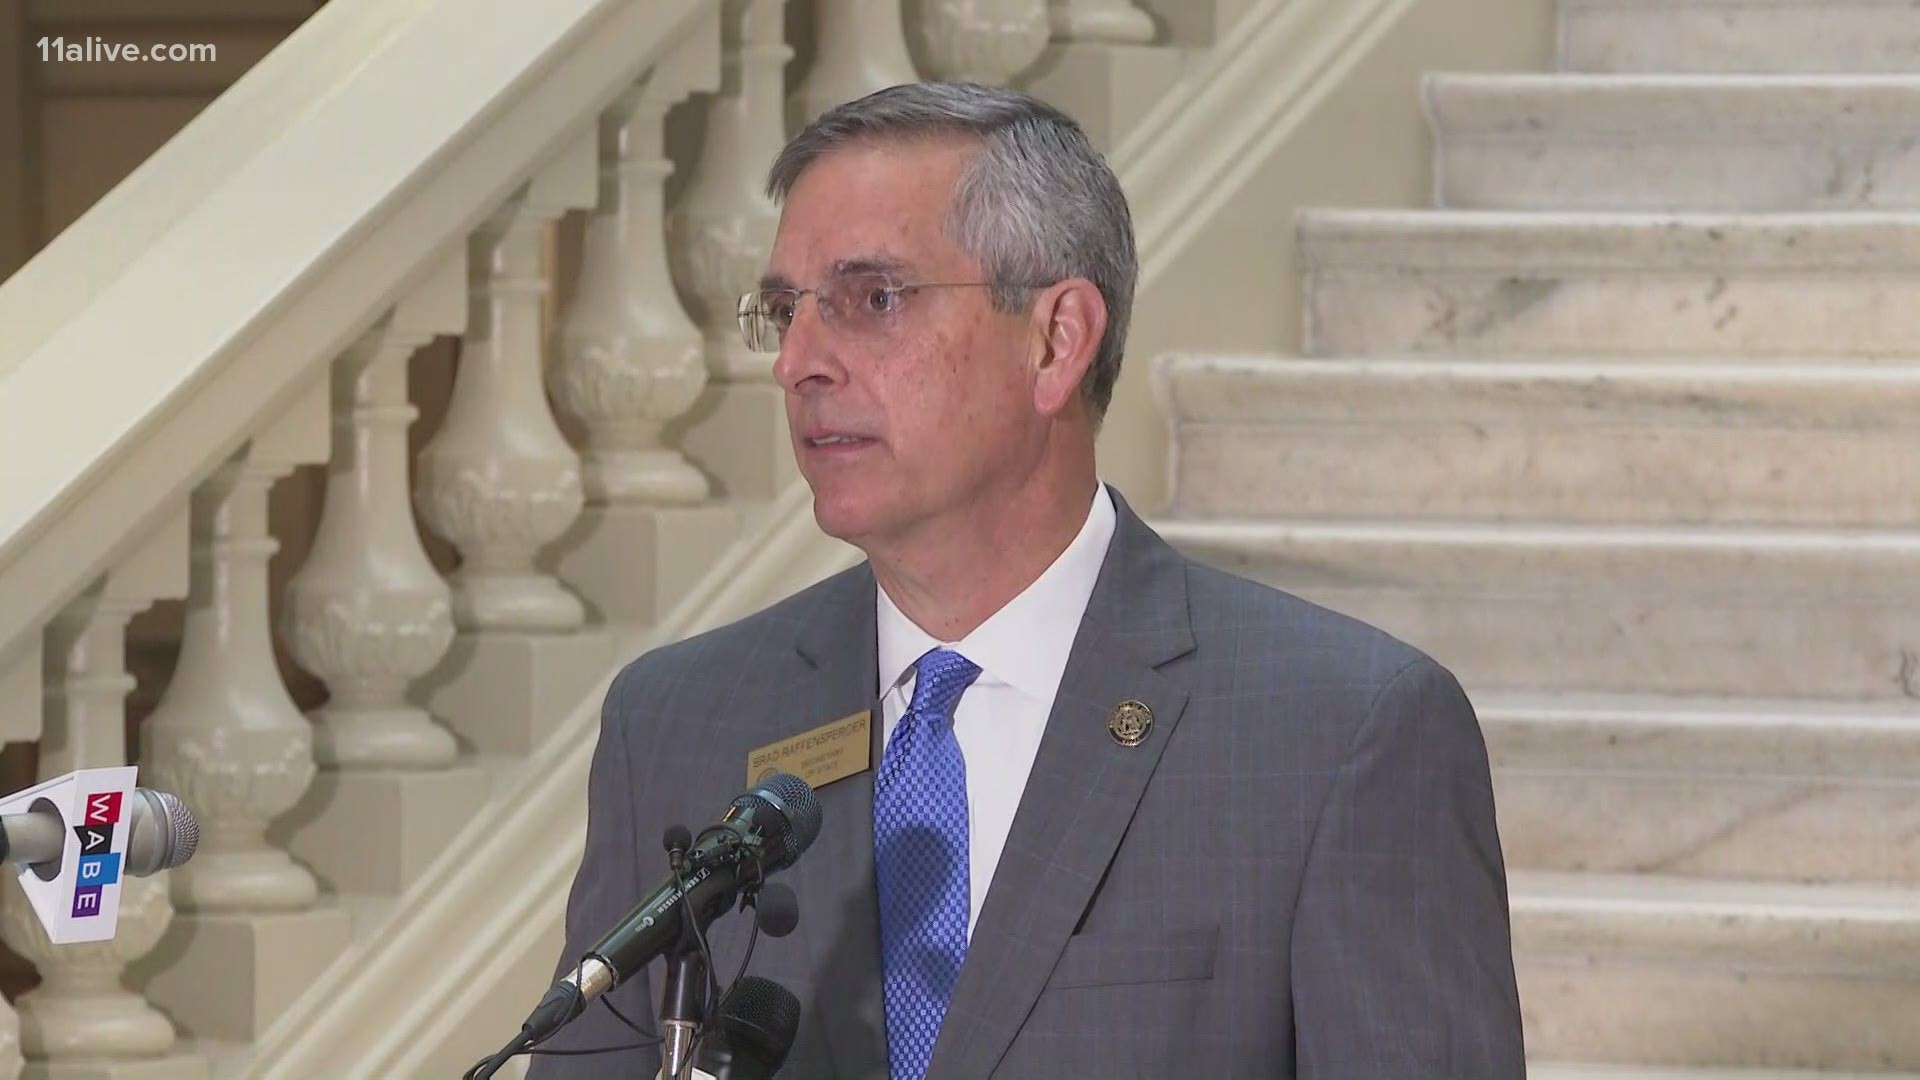 Georgia Secretary of State Brad Raffensperger held a press conference regarding early voting on Wednesday at the south staircase at the Georgia Capitol at 10 a.m.